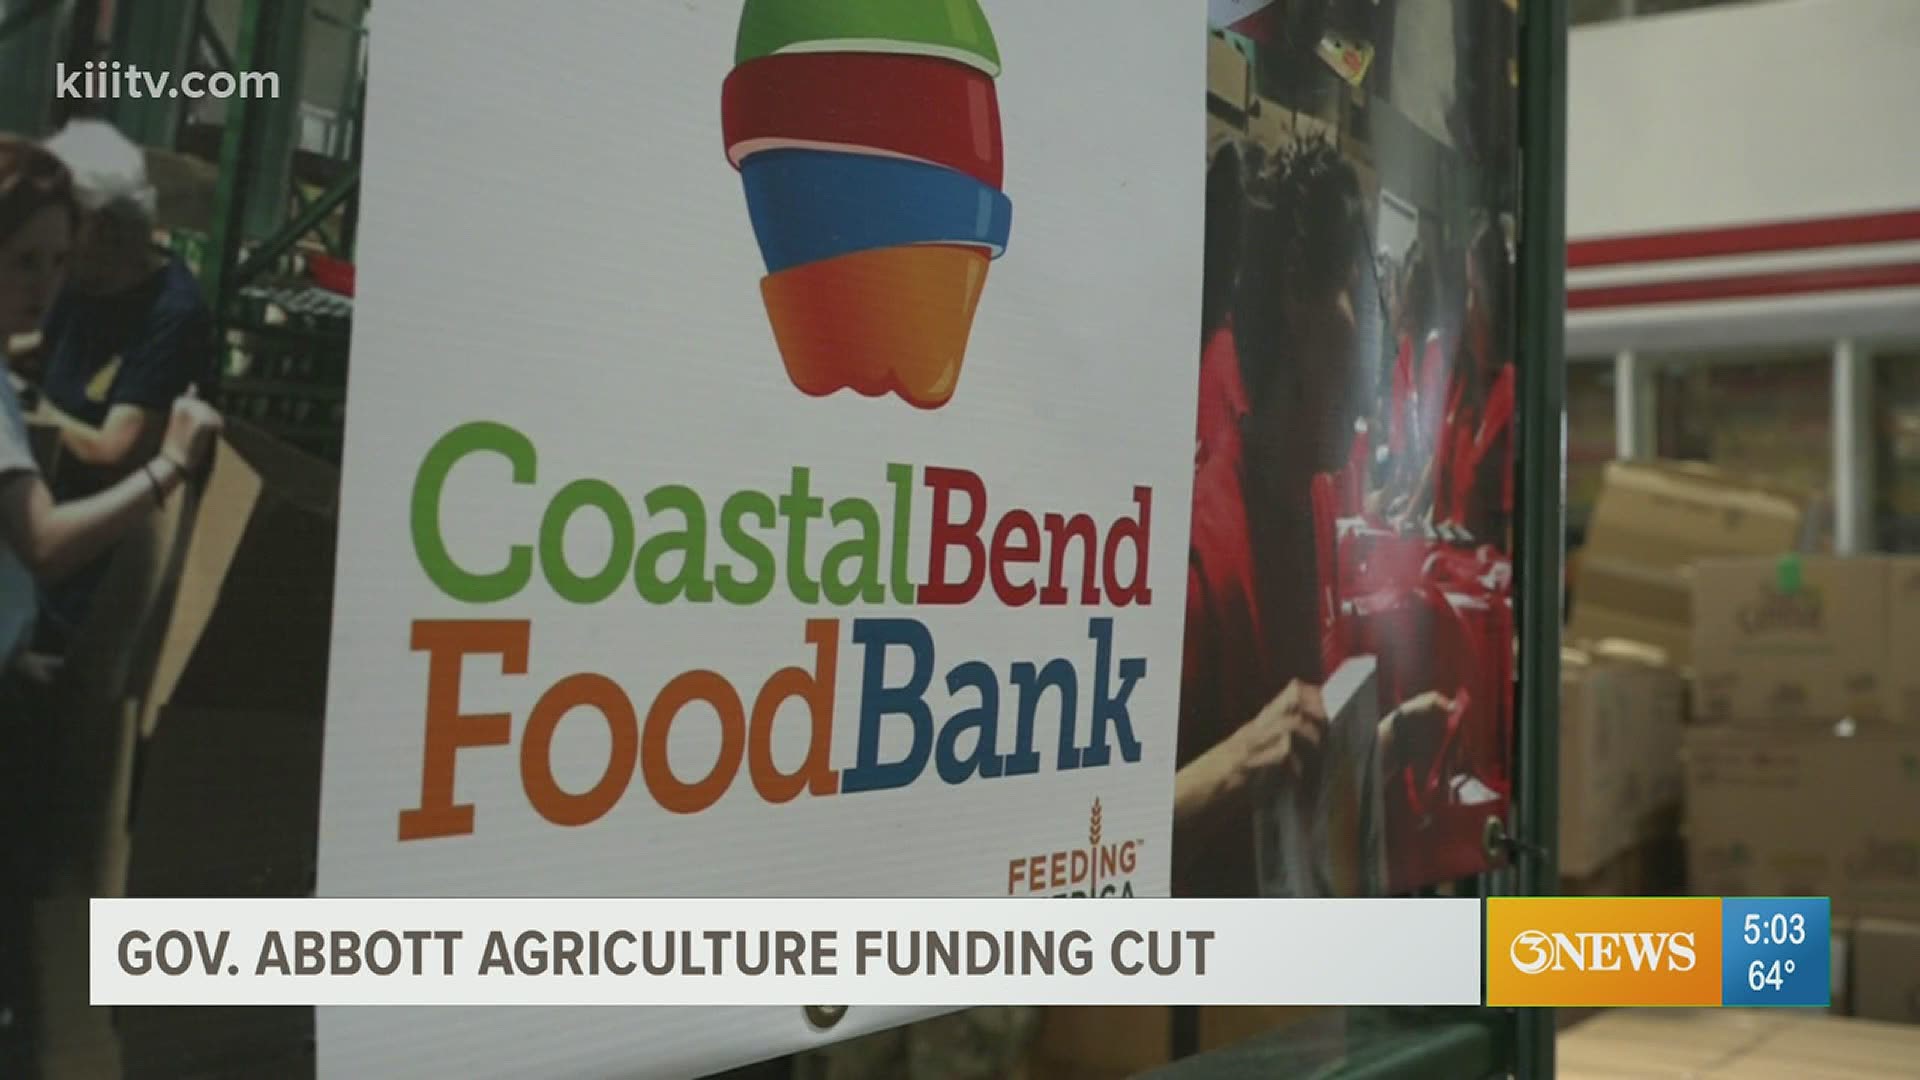 For the Coastal Bend Food Bank -- that means a loss of $30,000.